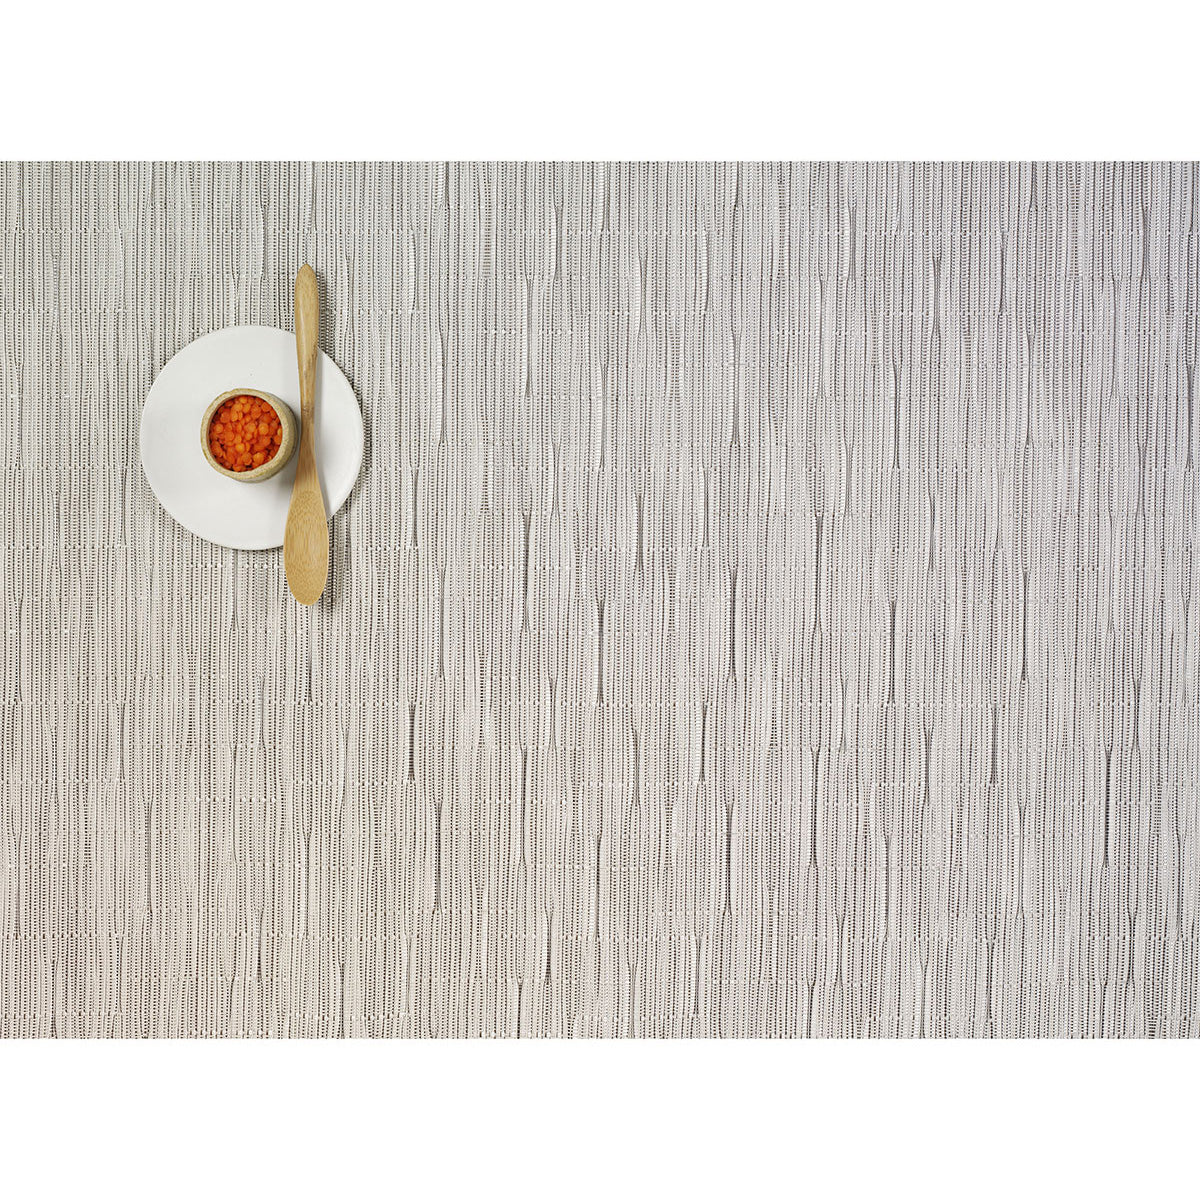 Chilewich Placemat - Bamboo - Chalk